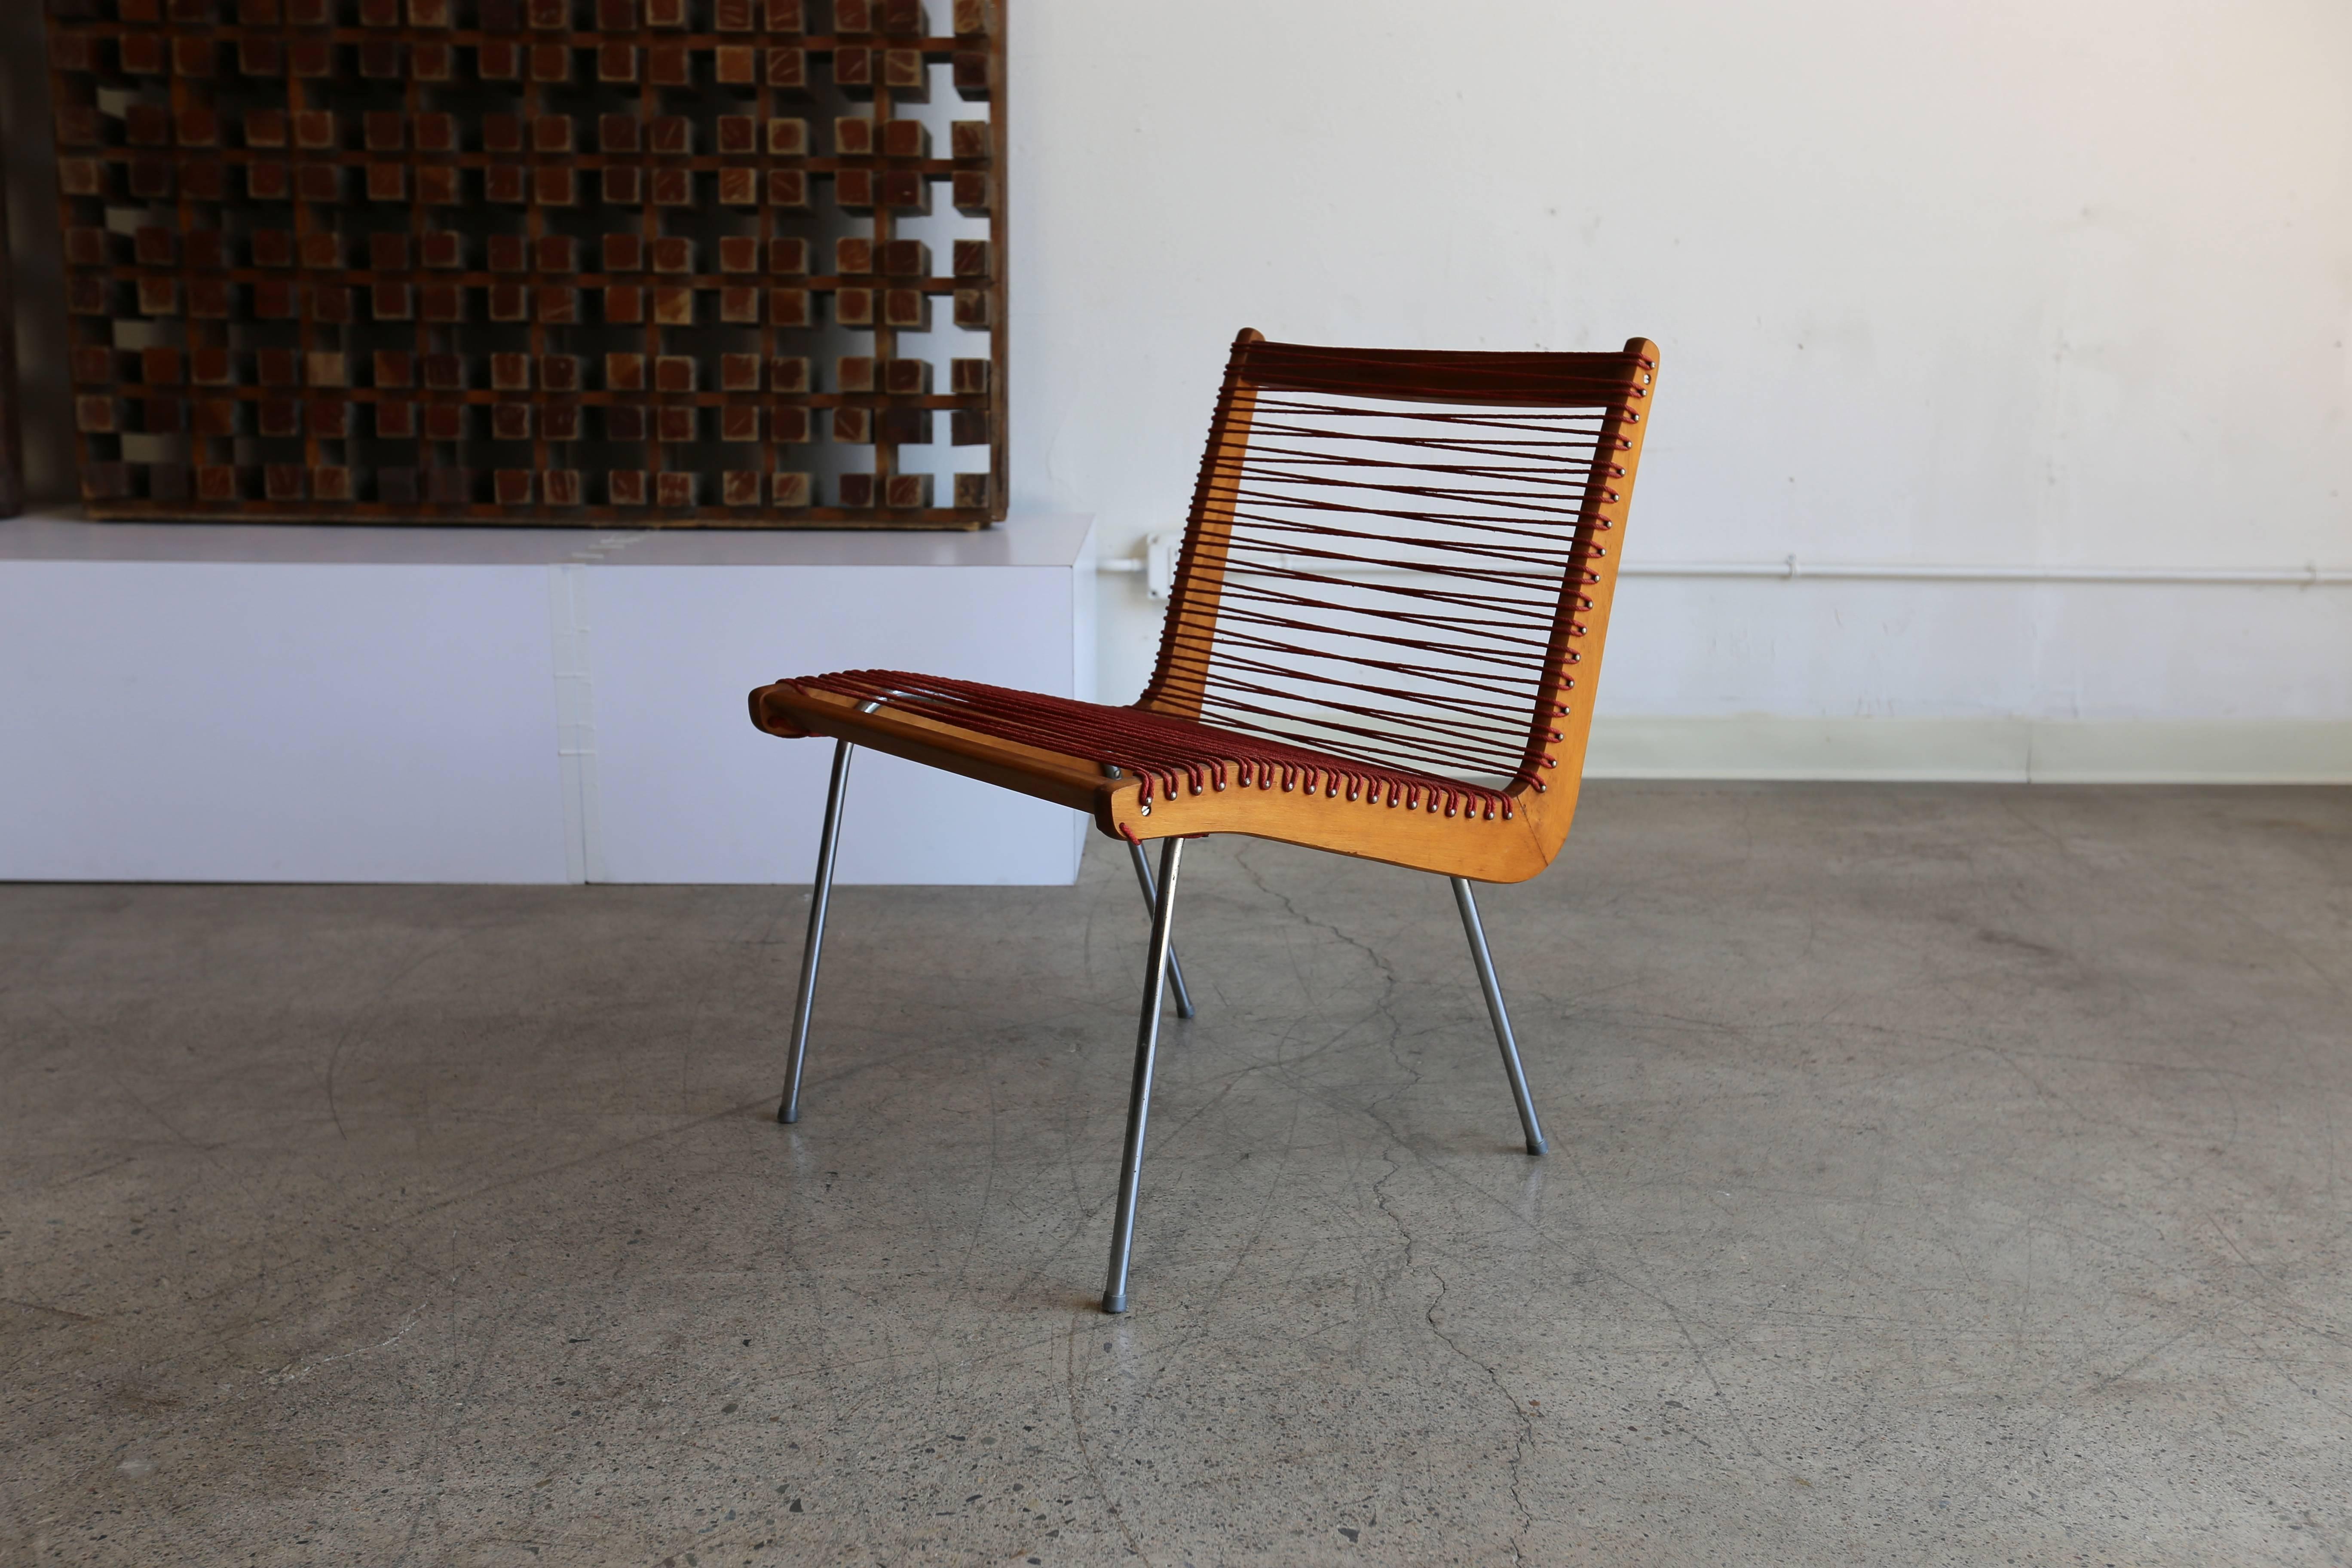 String chair by Robert J Ellenberger for Calfab Furniture Company, Los Angeles.

Selected for a Museum of Modern Art Good Design exhibition in 1950. 

